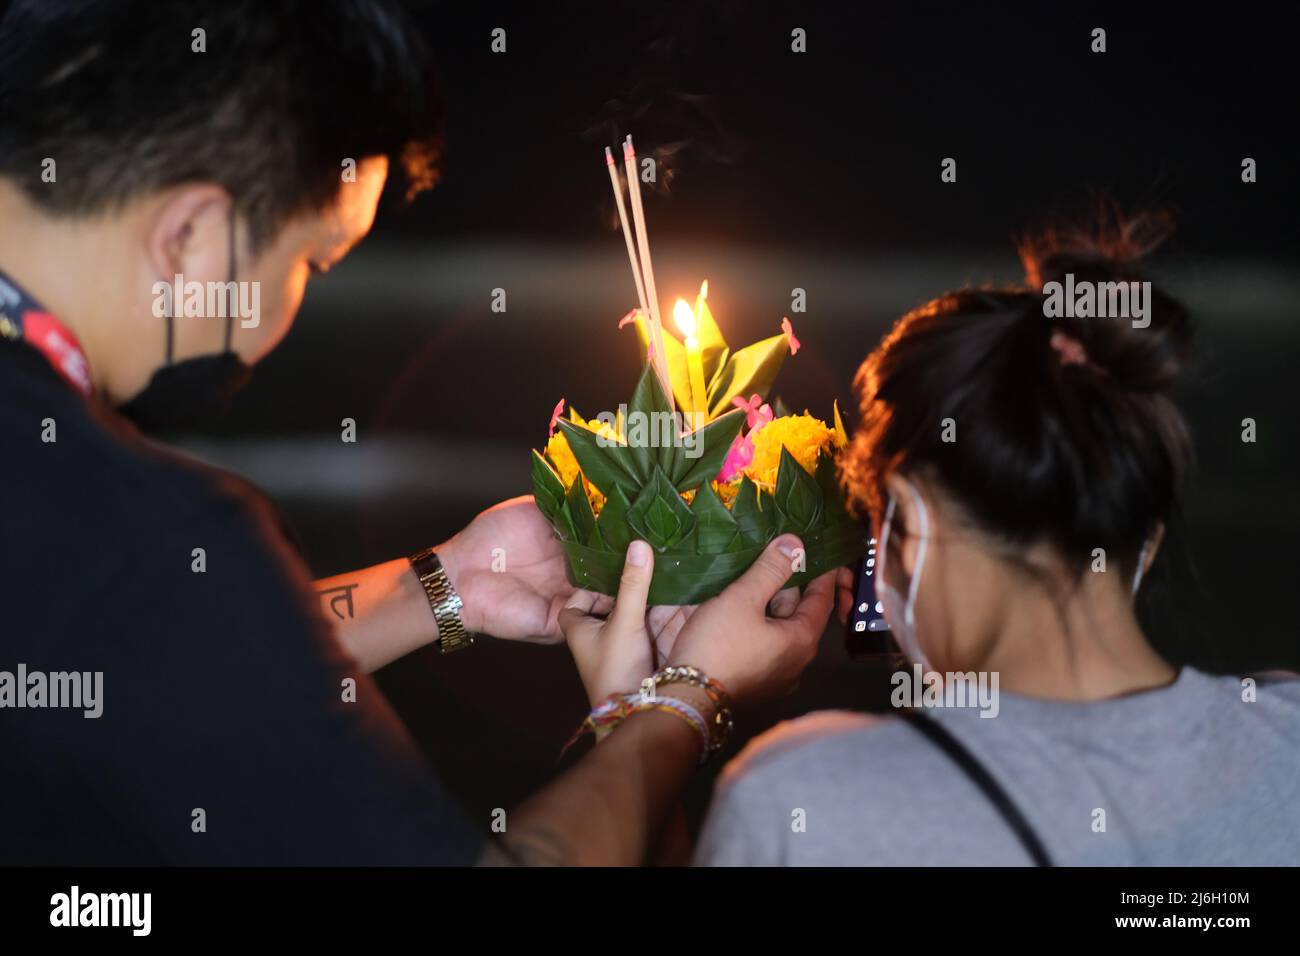 Krathong, a decorated basket with flowers and candle, is ready to be released to the sea on a night of Loy Krathong celebration in Thailand Stock Photo